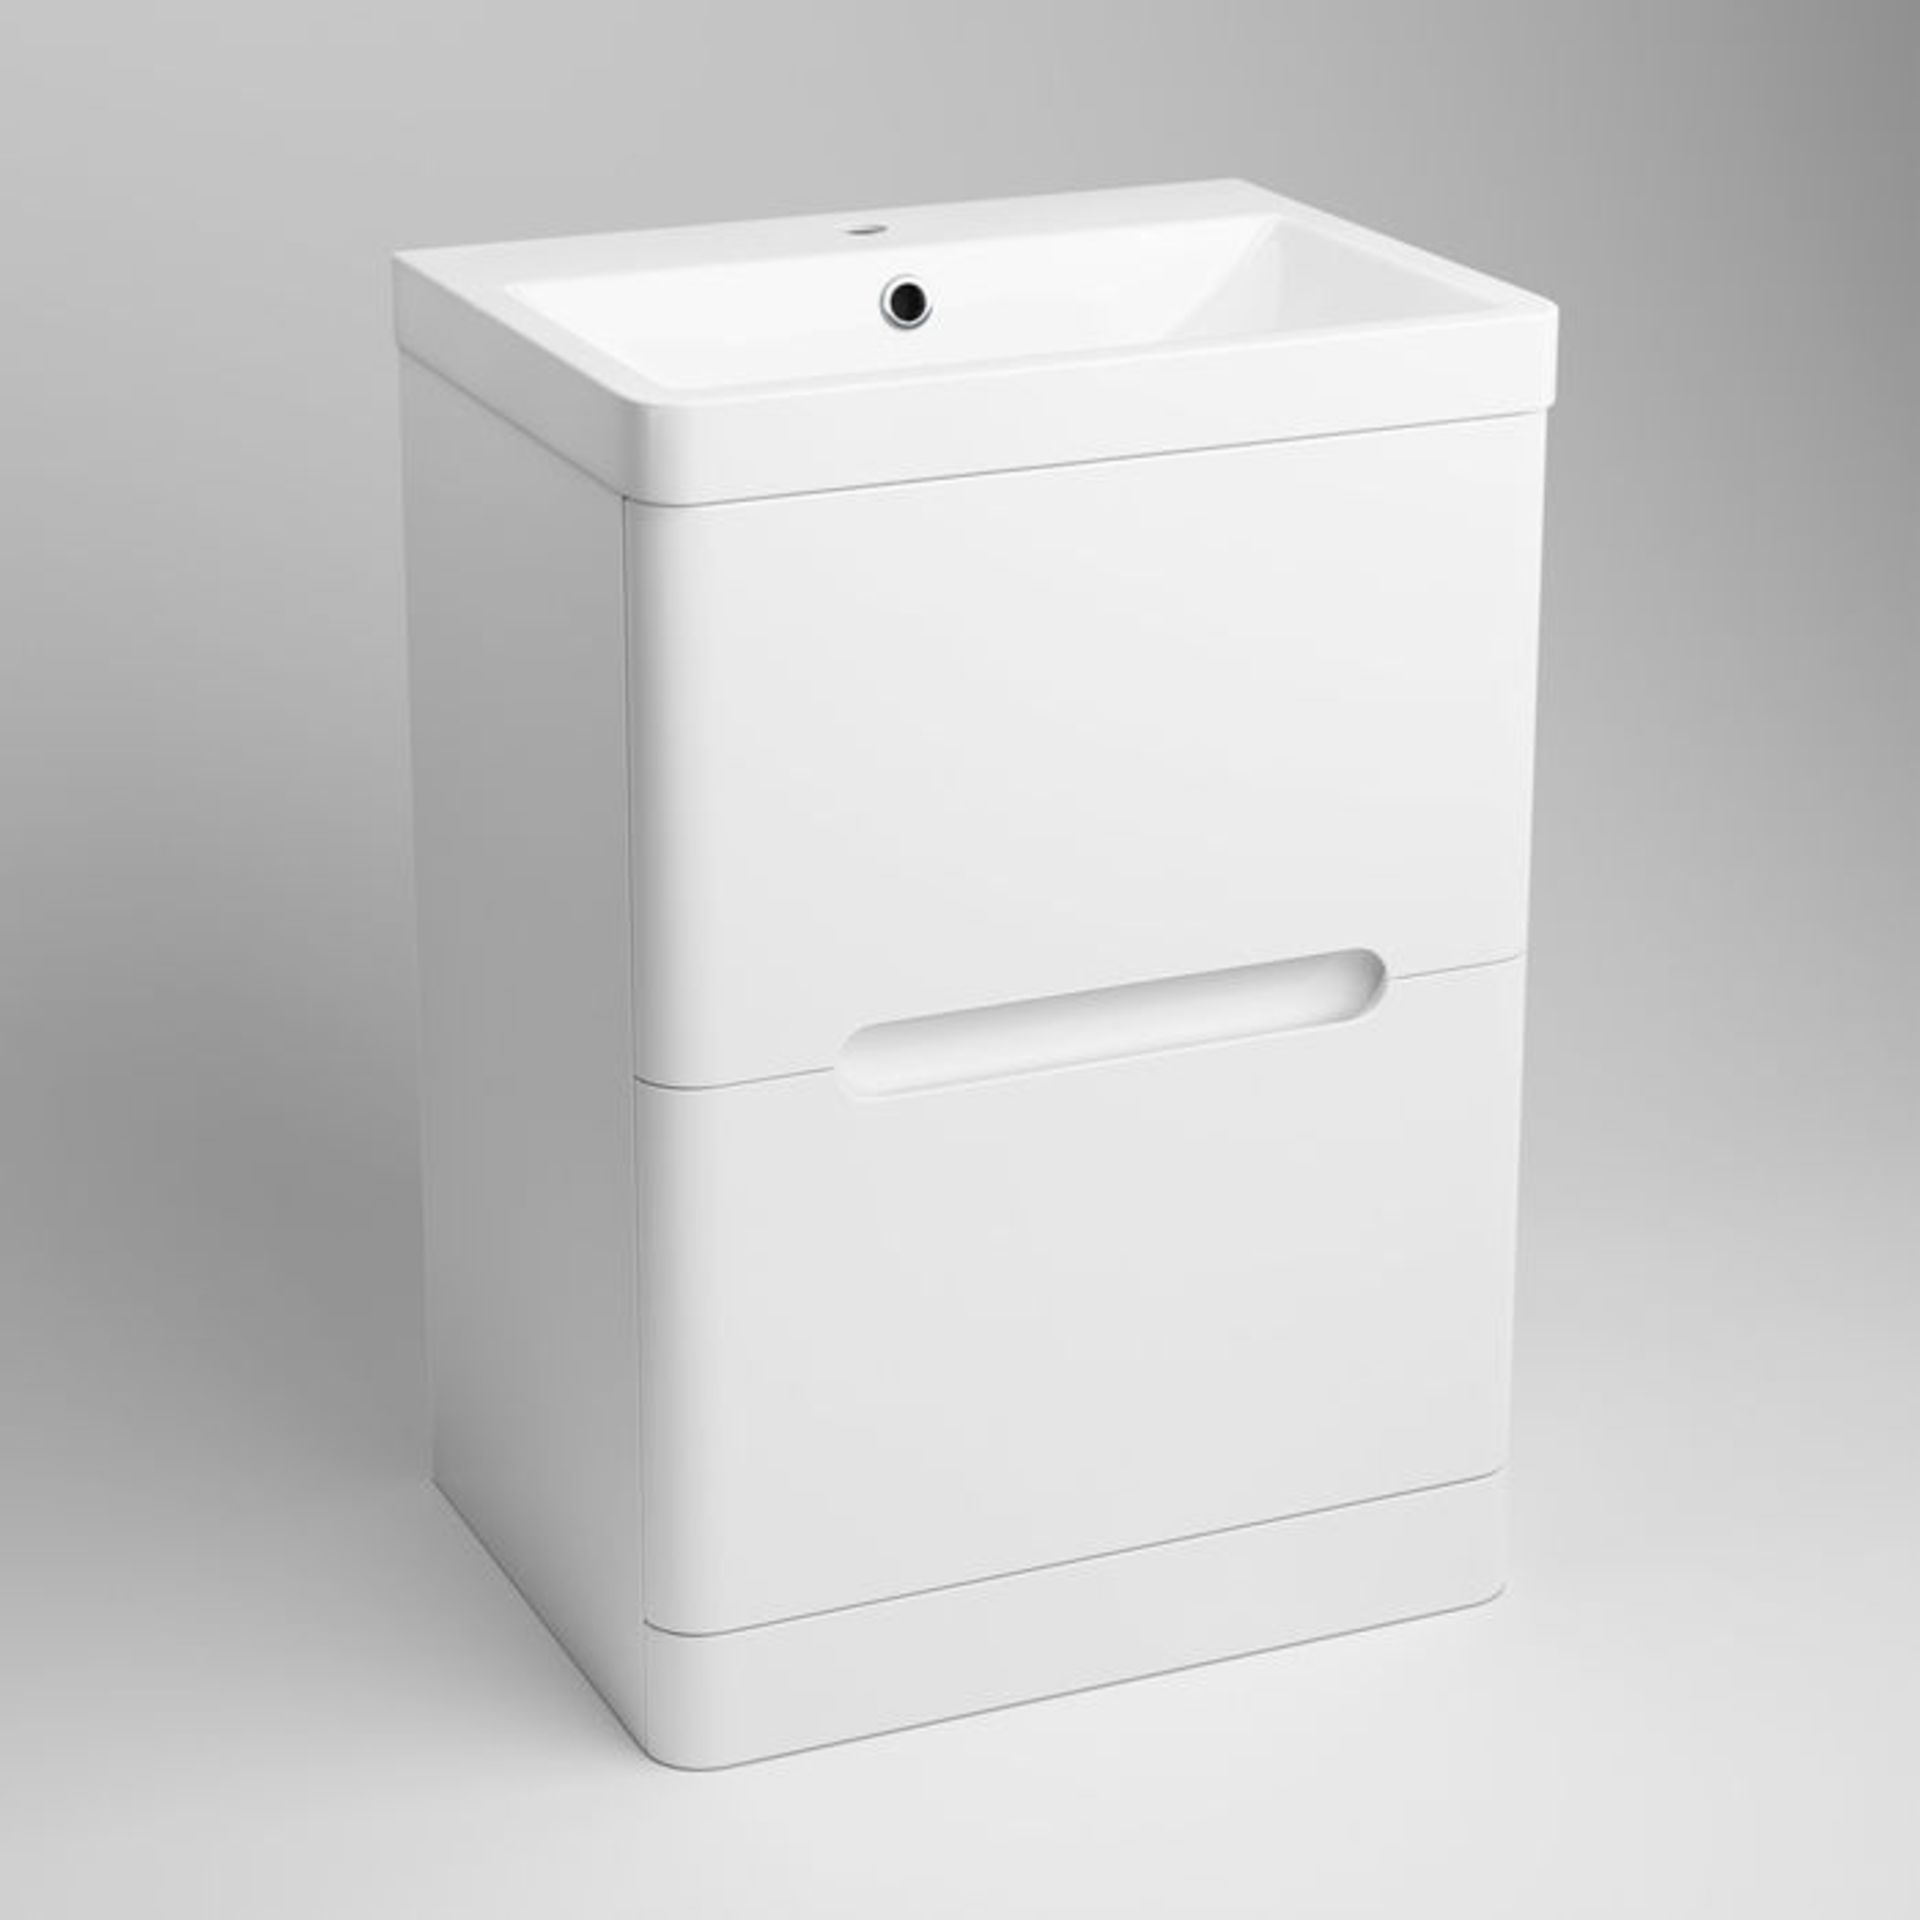 (G75) 600mm Tuscany Gloss White Built In Basin Double Drawer Unit - Floor Standing RRP £499.99. - Image 4 of 5